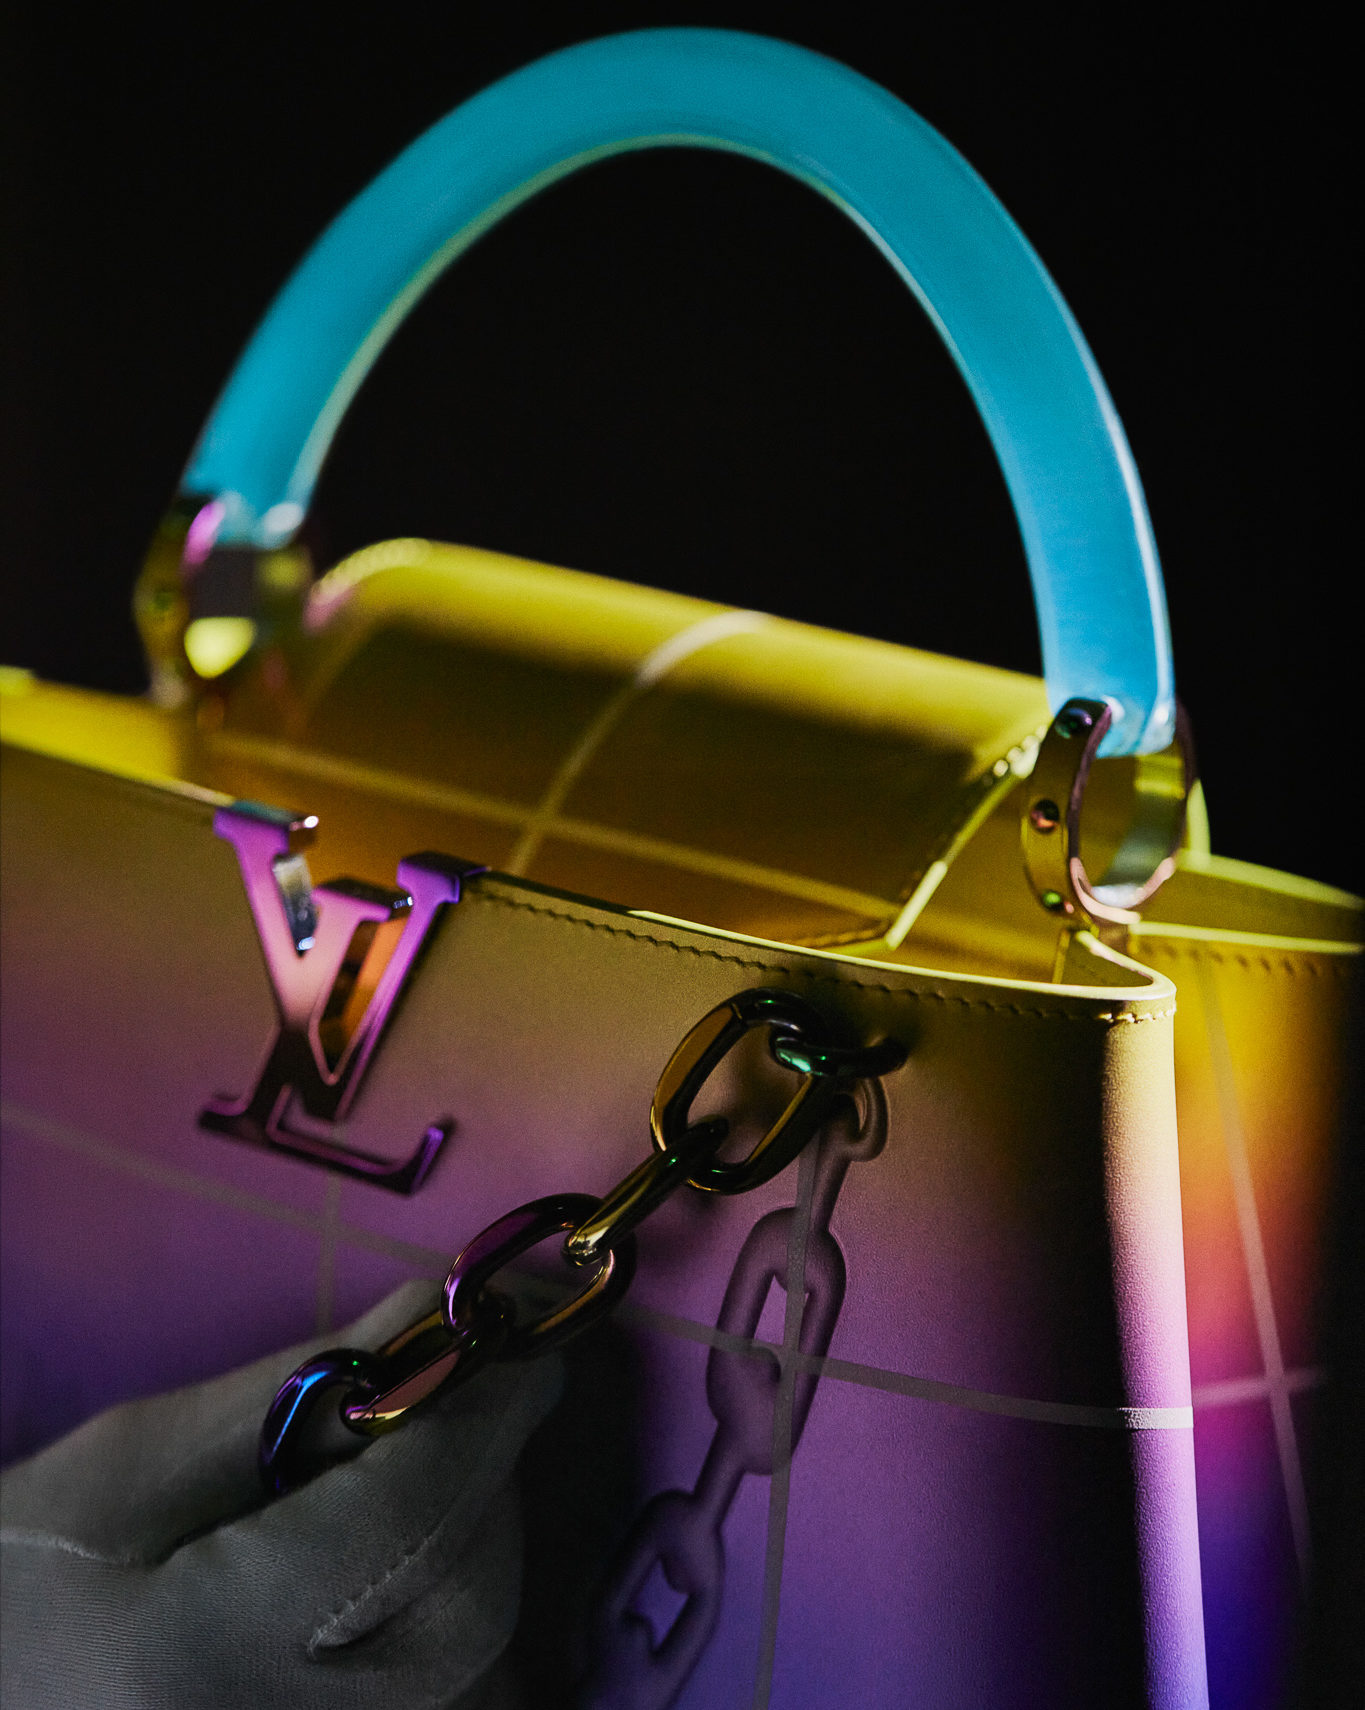 Louis Vuitton on X: Artycapucines Auction. Combining modern artistry with # LouisVuitton's savoir-faire, the #LVCapucines' iconic design has inspired  the creativity of numerous international artists. Discover the collection  and join the #SothebysParis